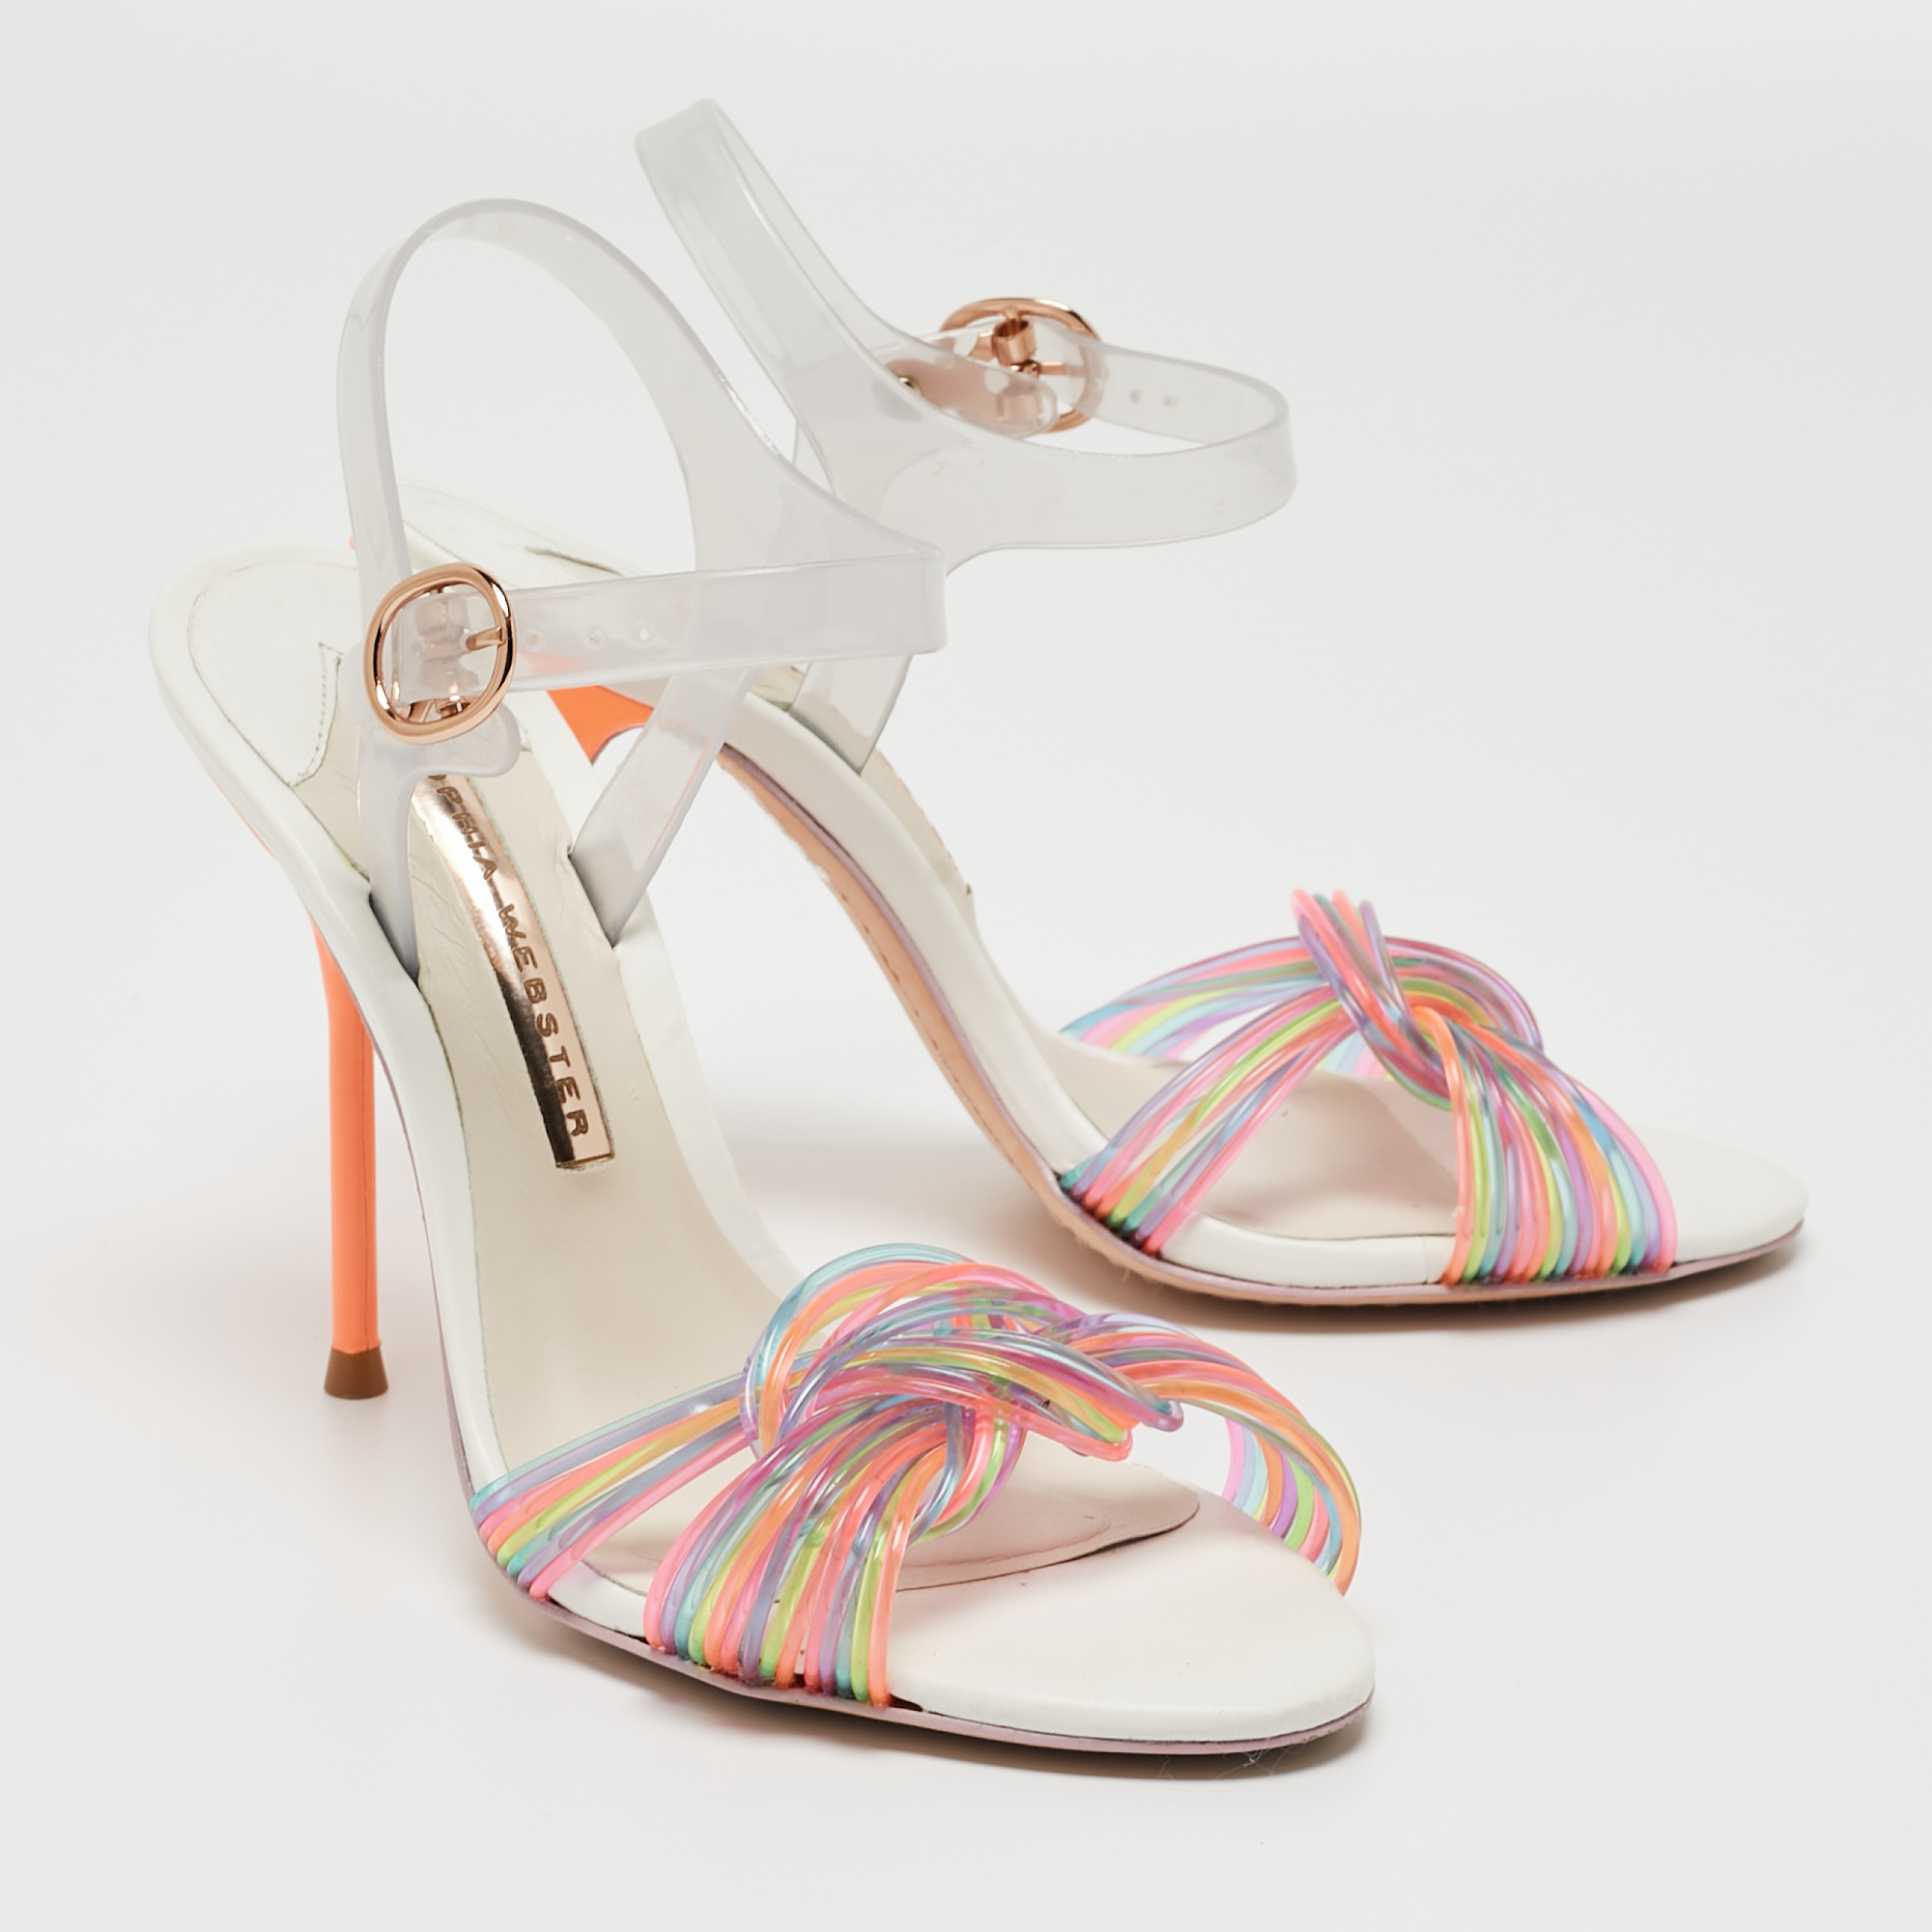 Sophia Webster Multicolor PVC And Jelly Coralie Ankle Strap Sandals Size 36.5